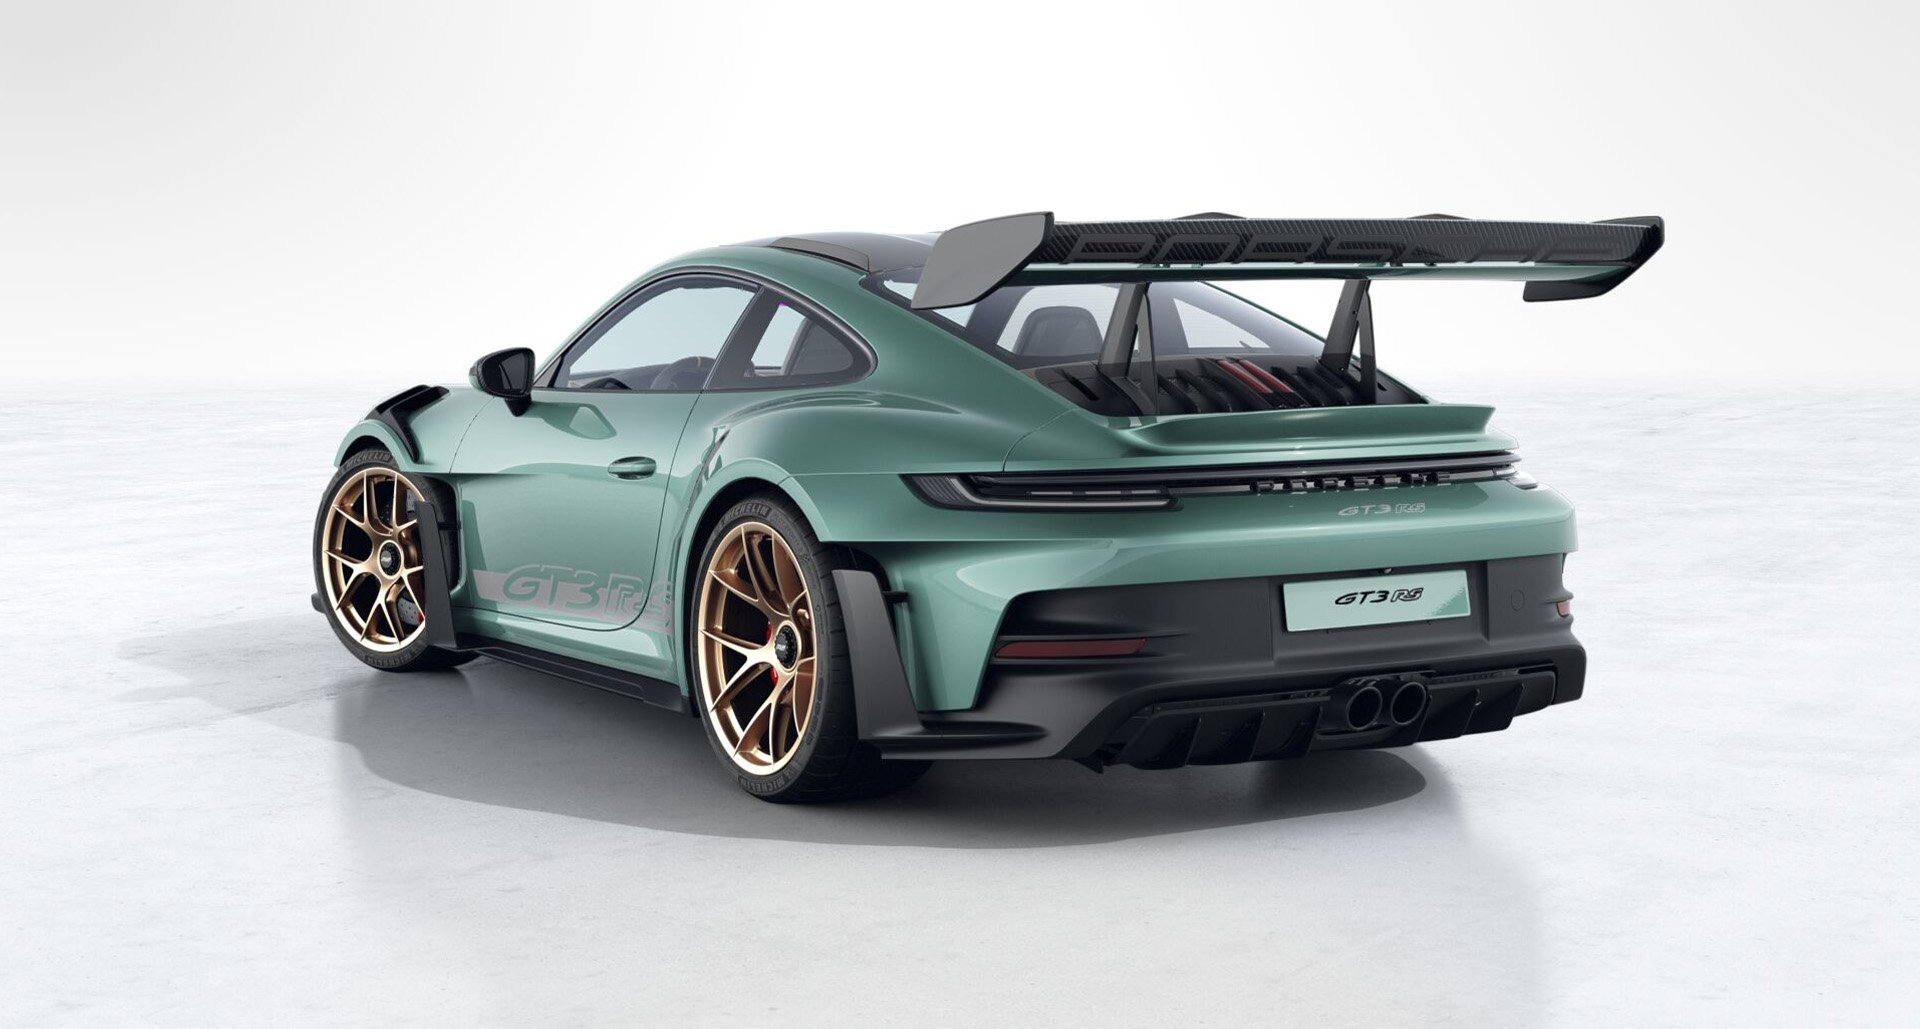 The 992 Porsche 911 GT3 RS ups the ante and the downforce